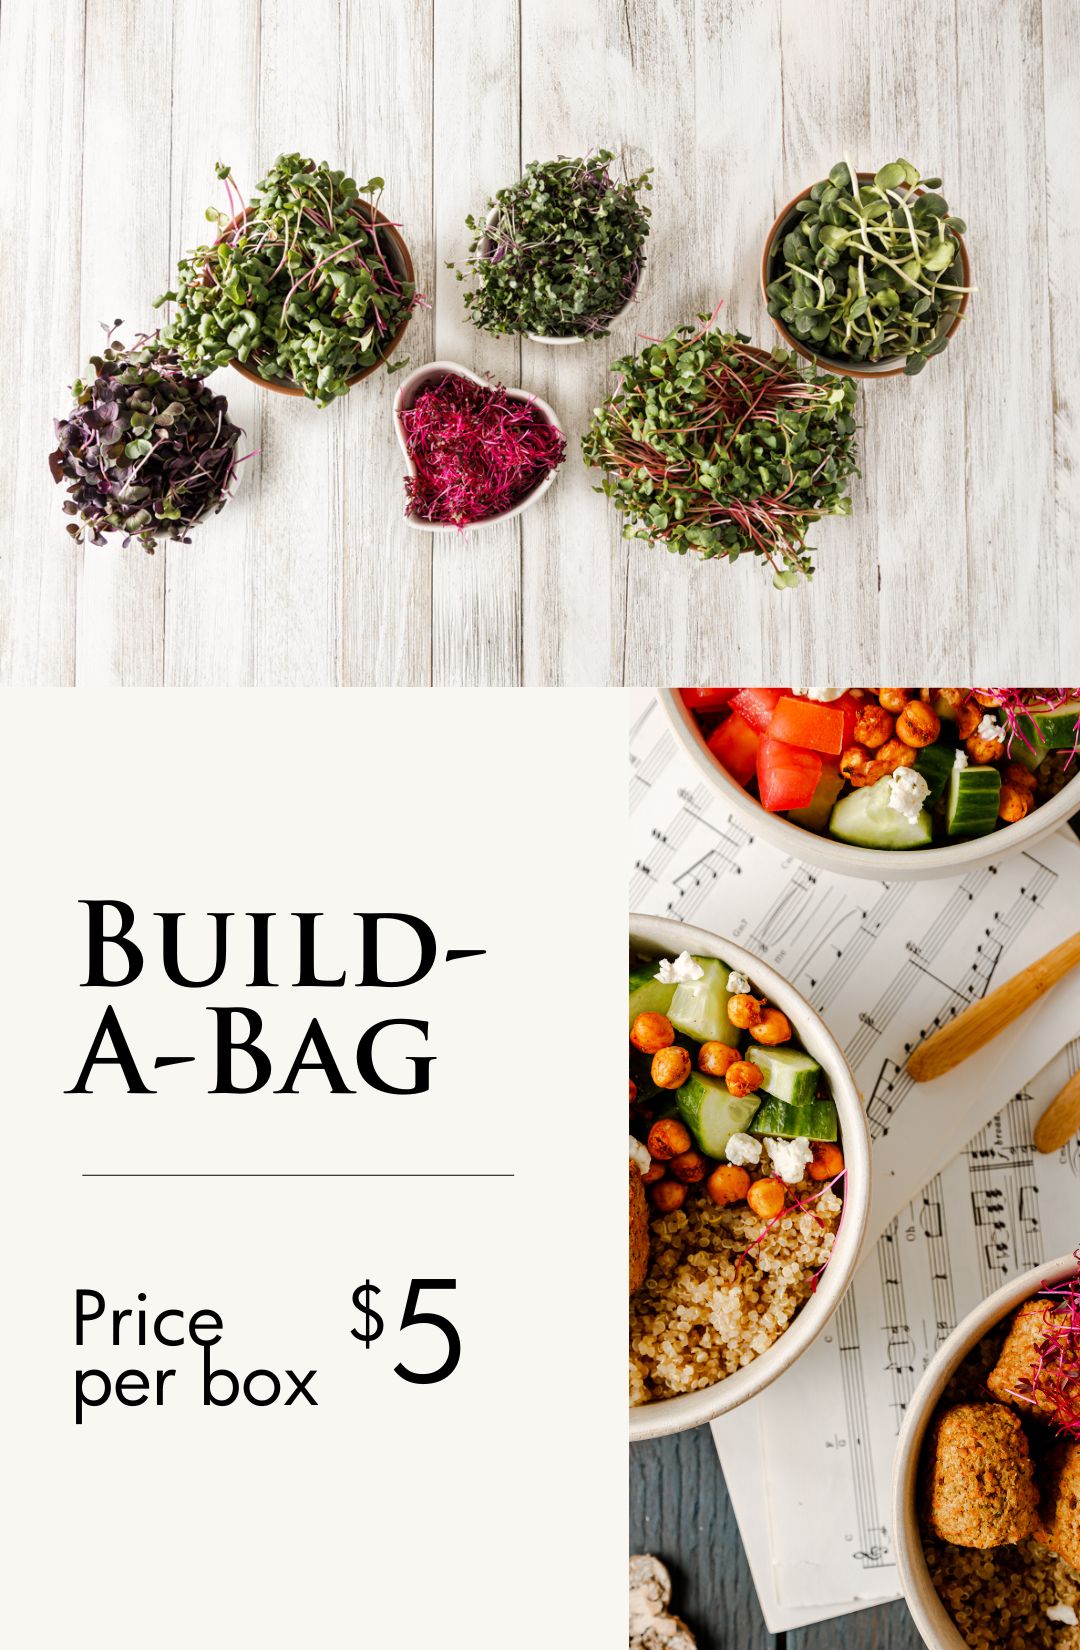 Hunters’ Dale Build-A-Bag Microgreen Subscriptions, Fraser Valley, Mission BC, Chilliwack BC, Abbotsford BC